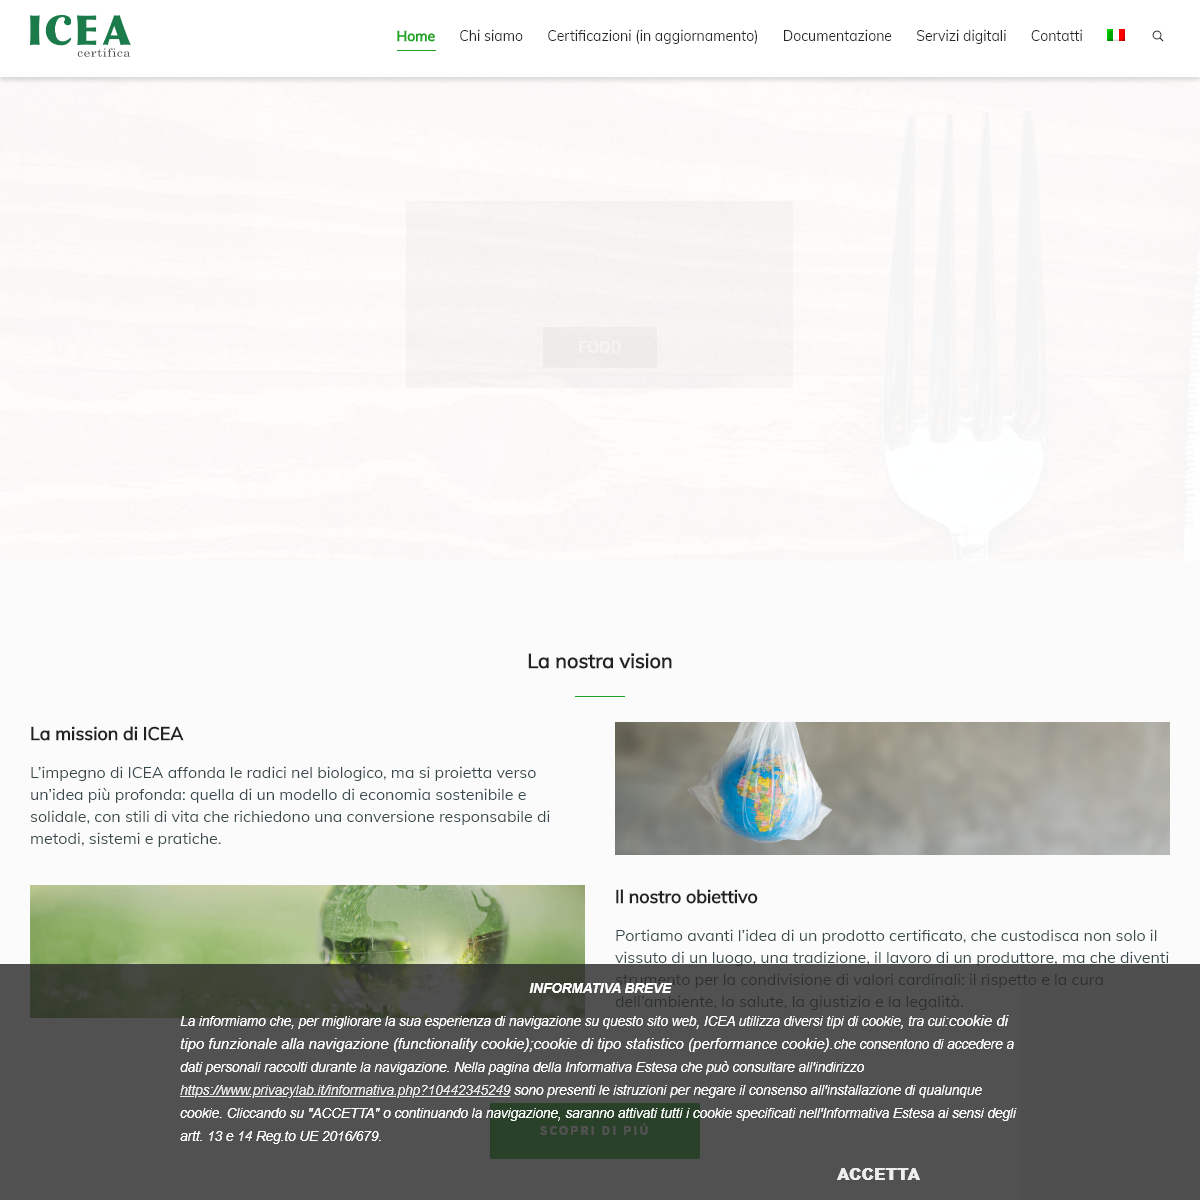 A complete backup of icea.bio